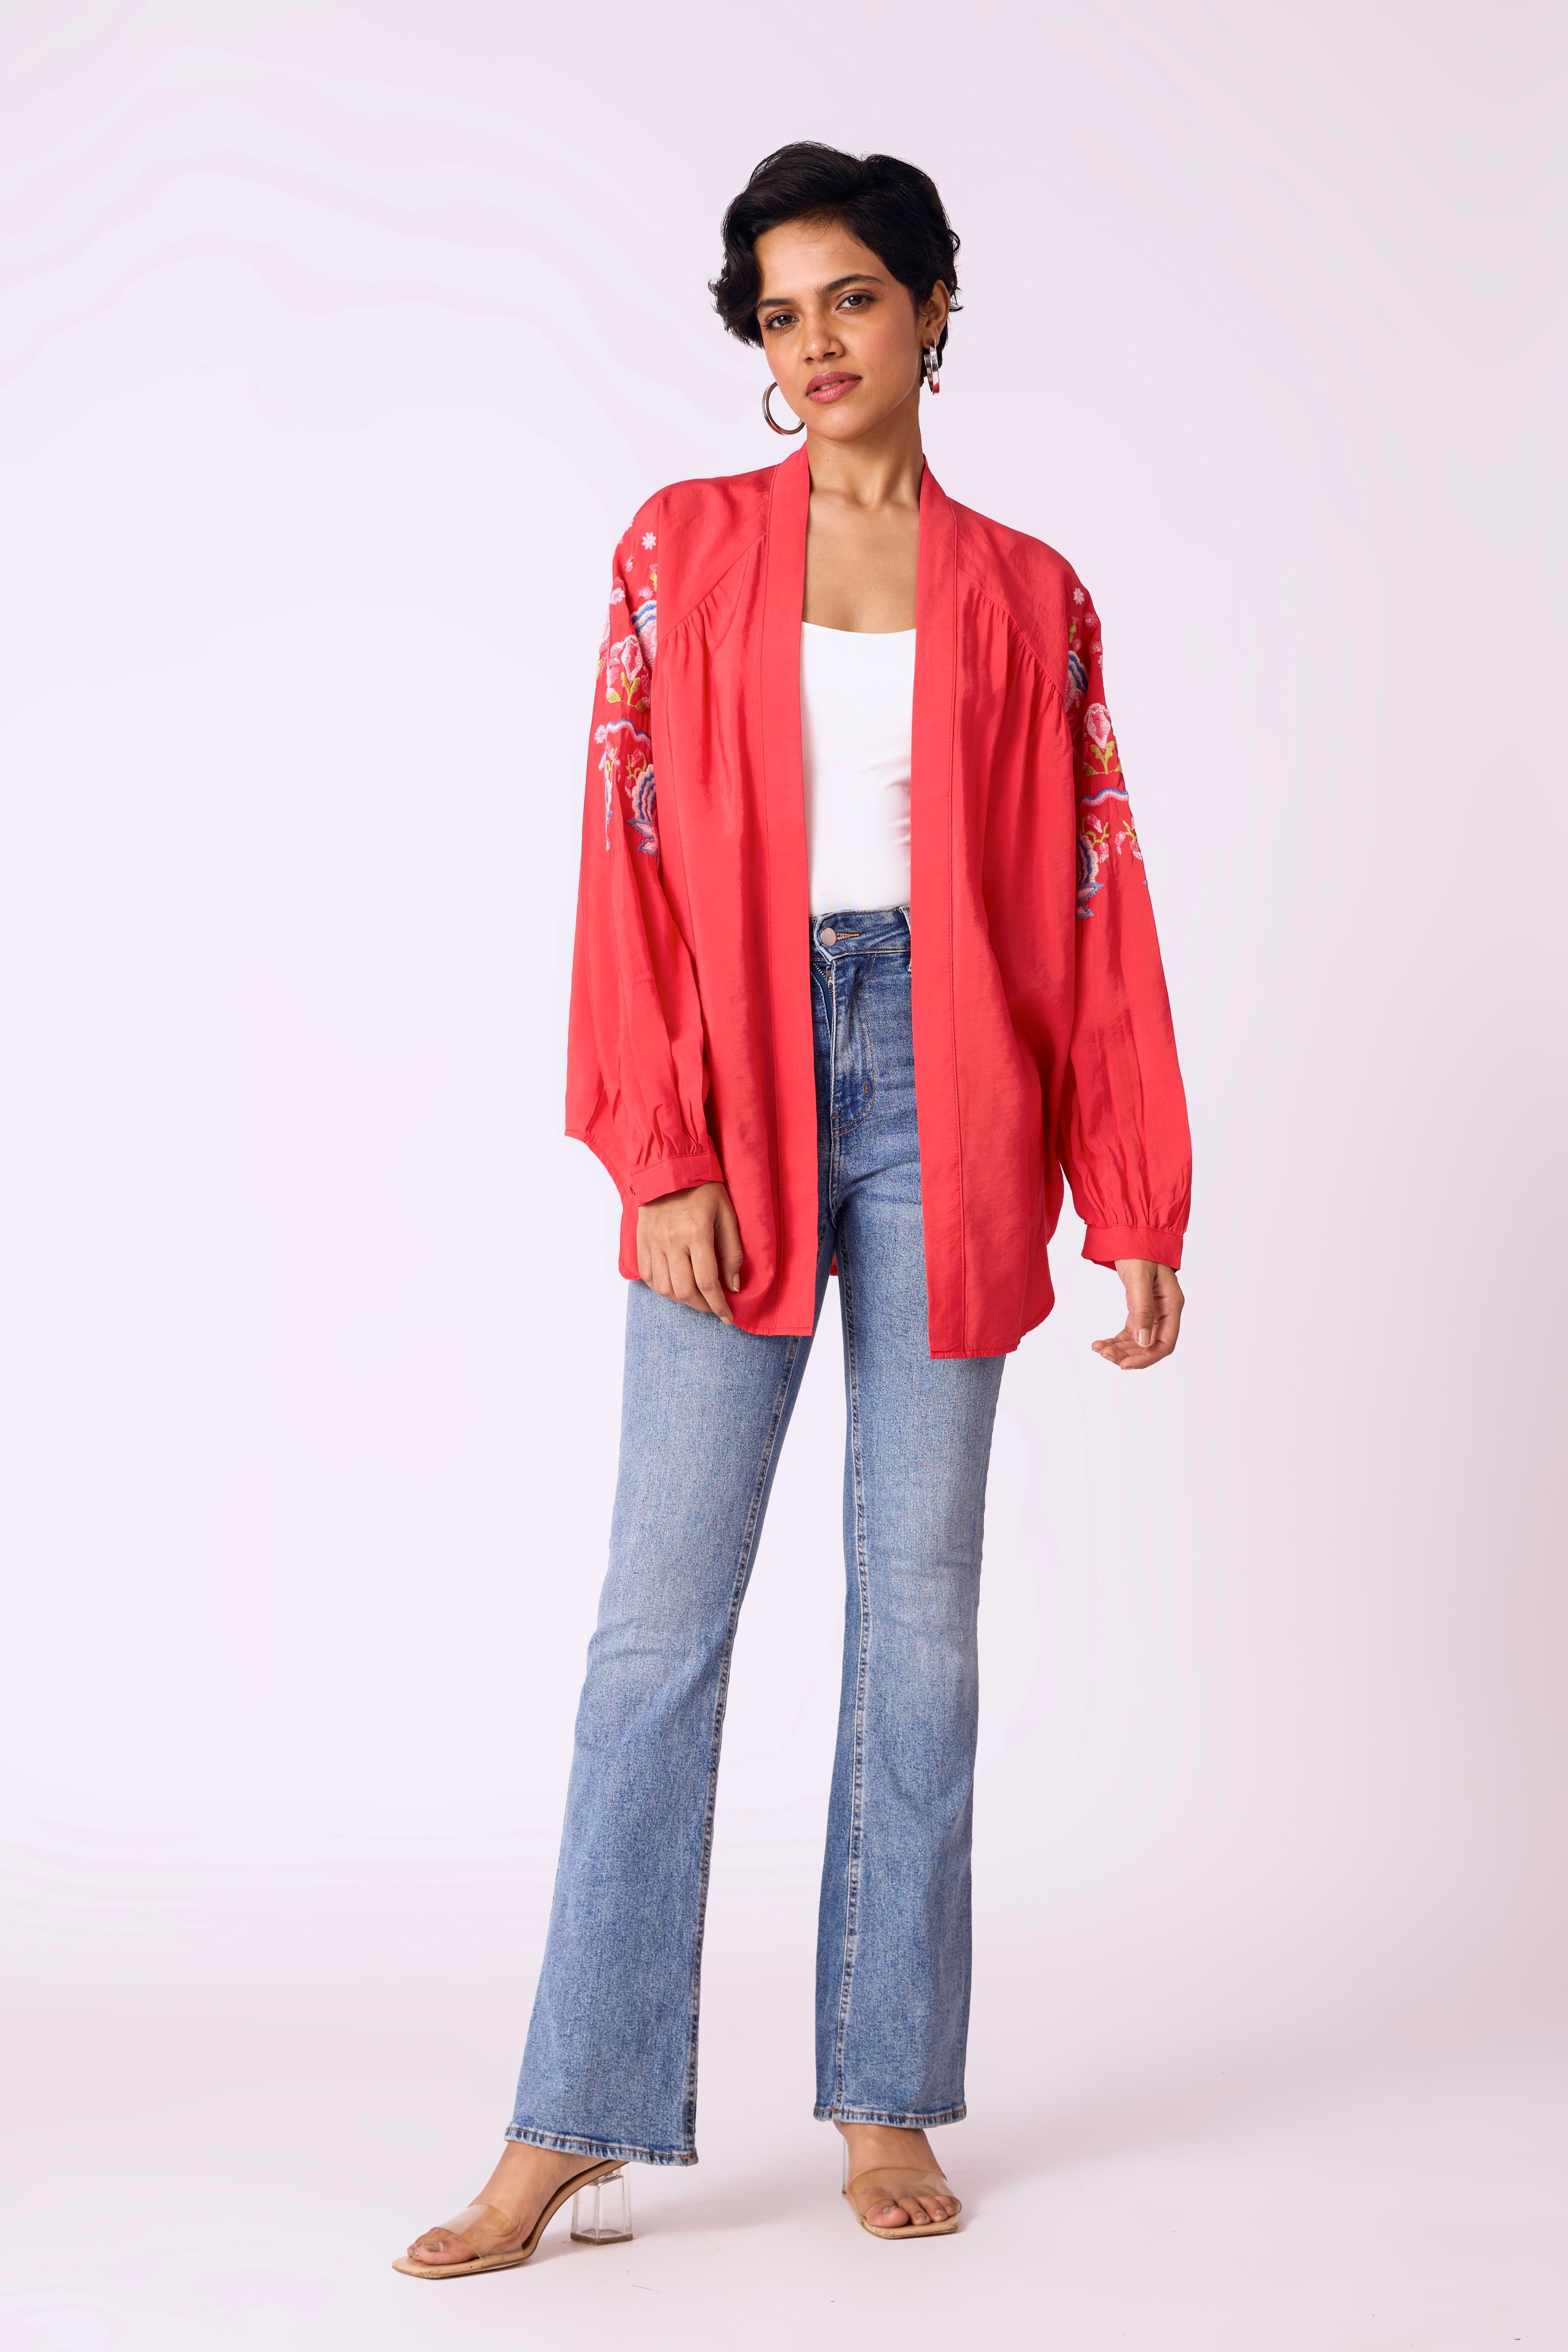 Yara Embroidered Overlay - Coral Red